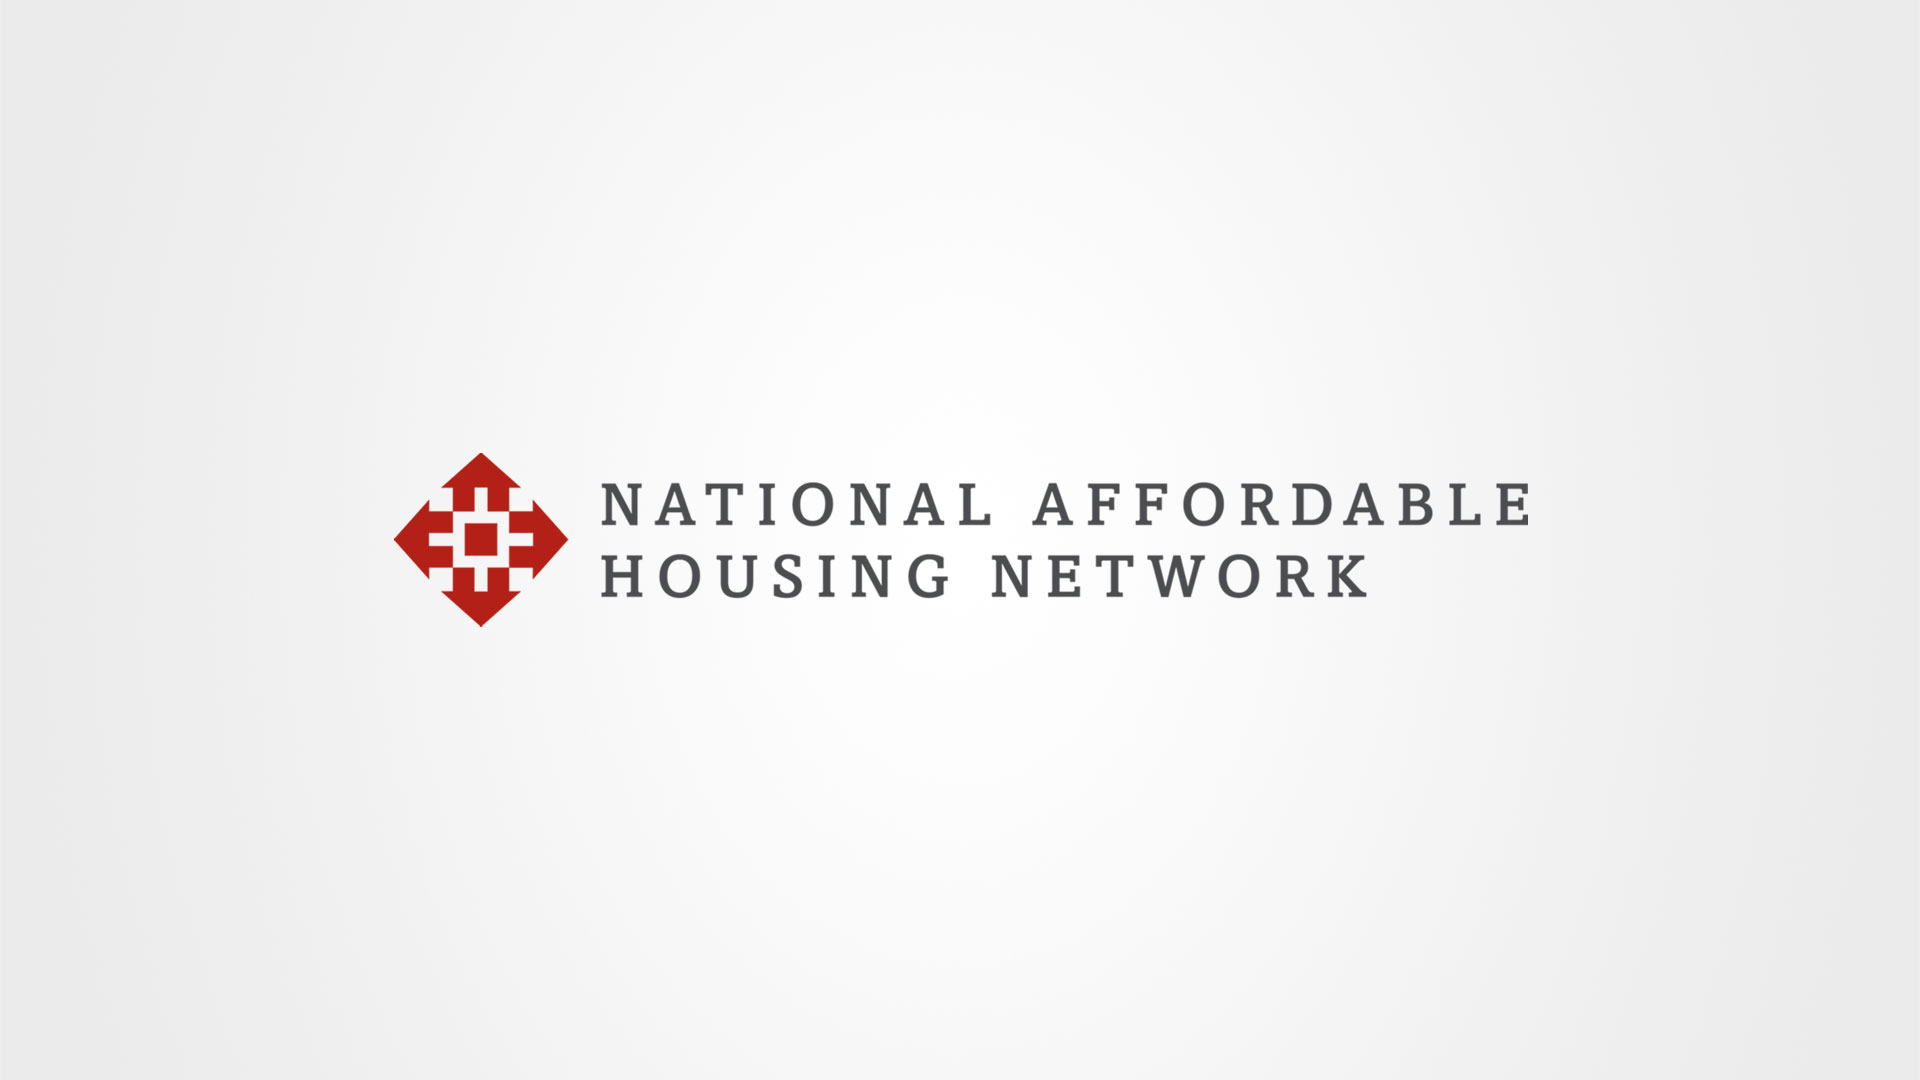 National-Affordable-Housing-Network-Logo-1920x1080